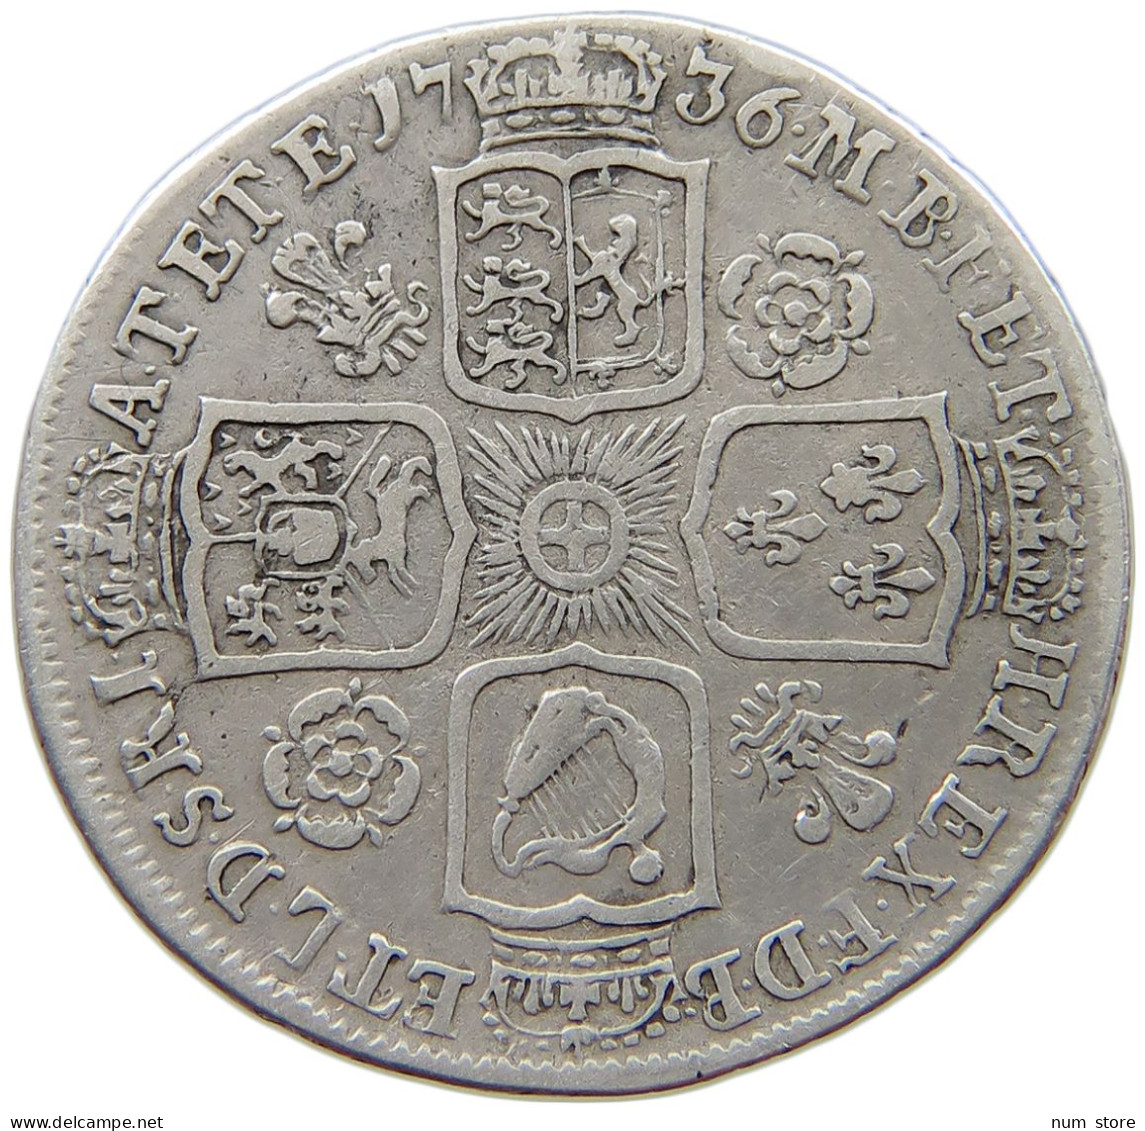 GREAT BRITAIN SHILLING 1736 George II. 1727-1760. #t148 0255 - H. 1 Shilling